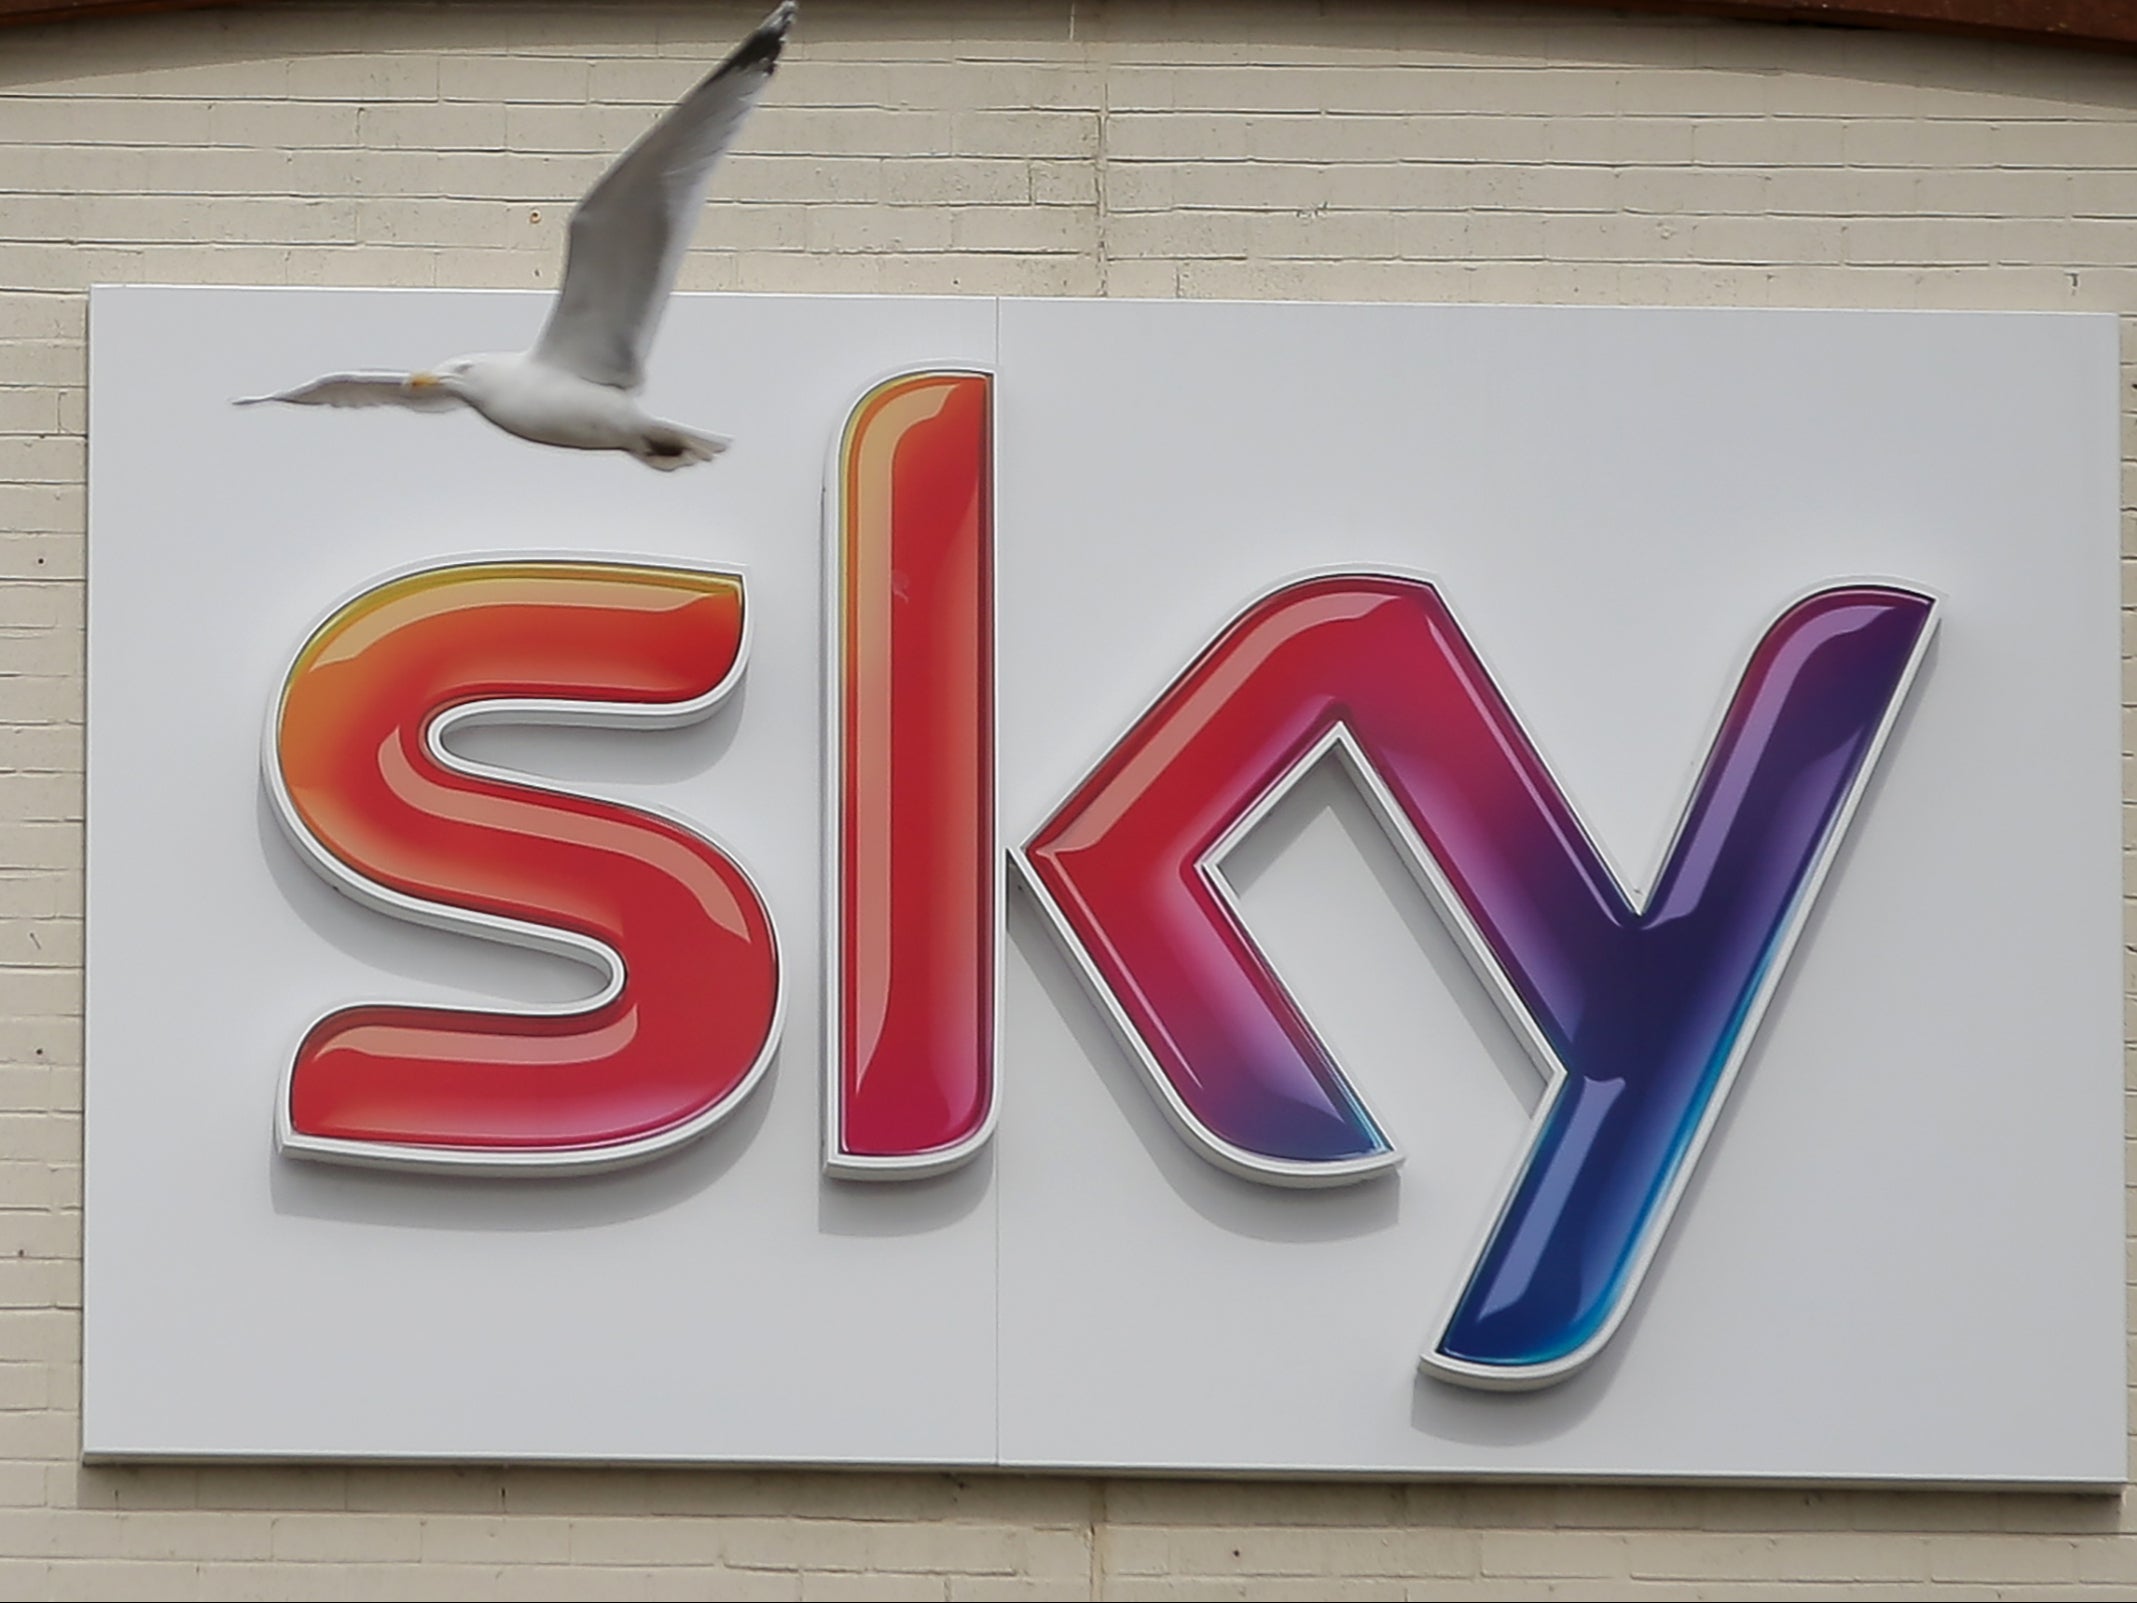 Sky internet users have complained about issues getting online